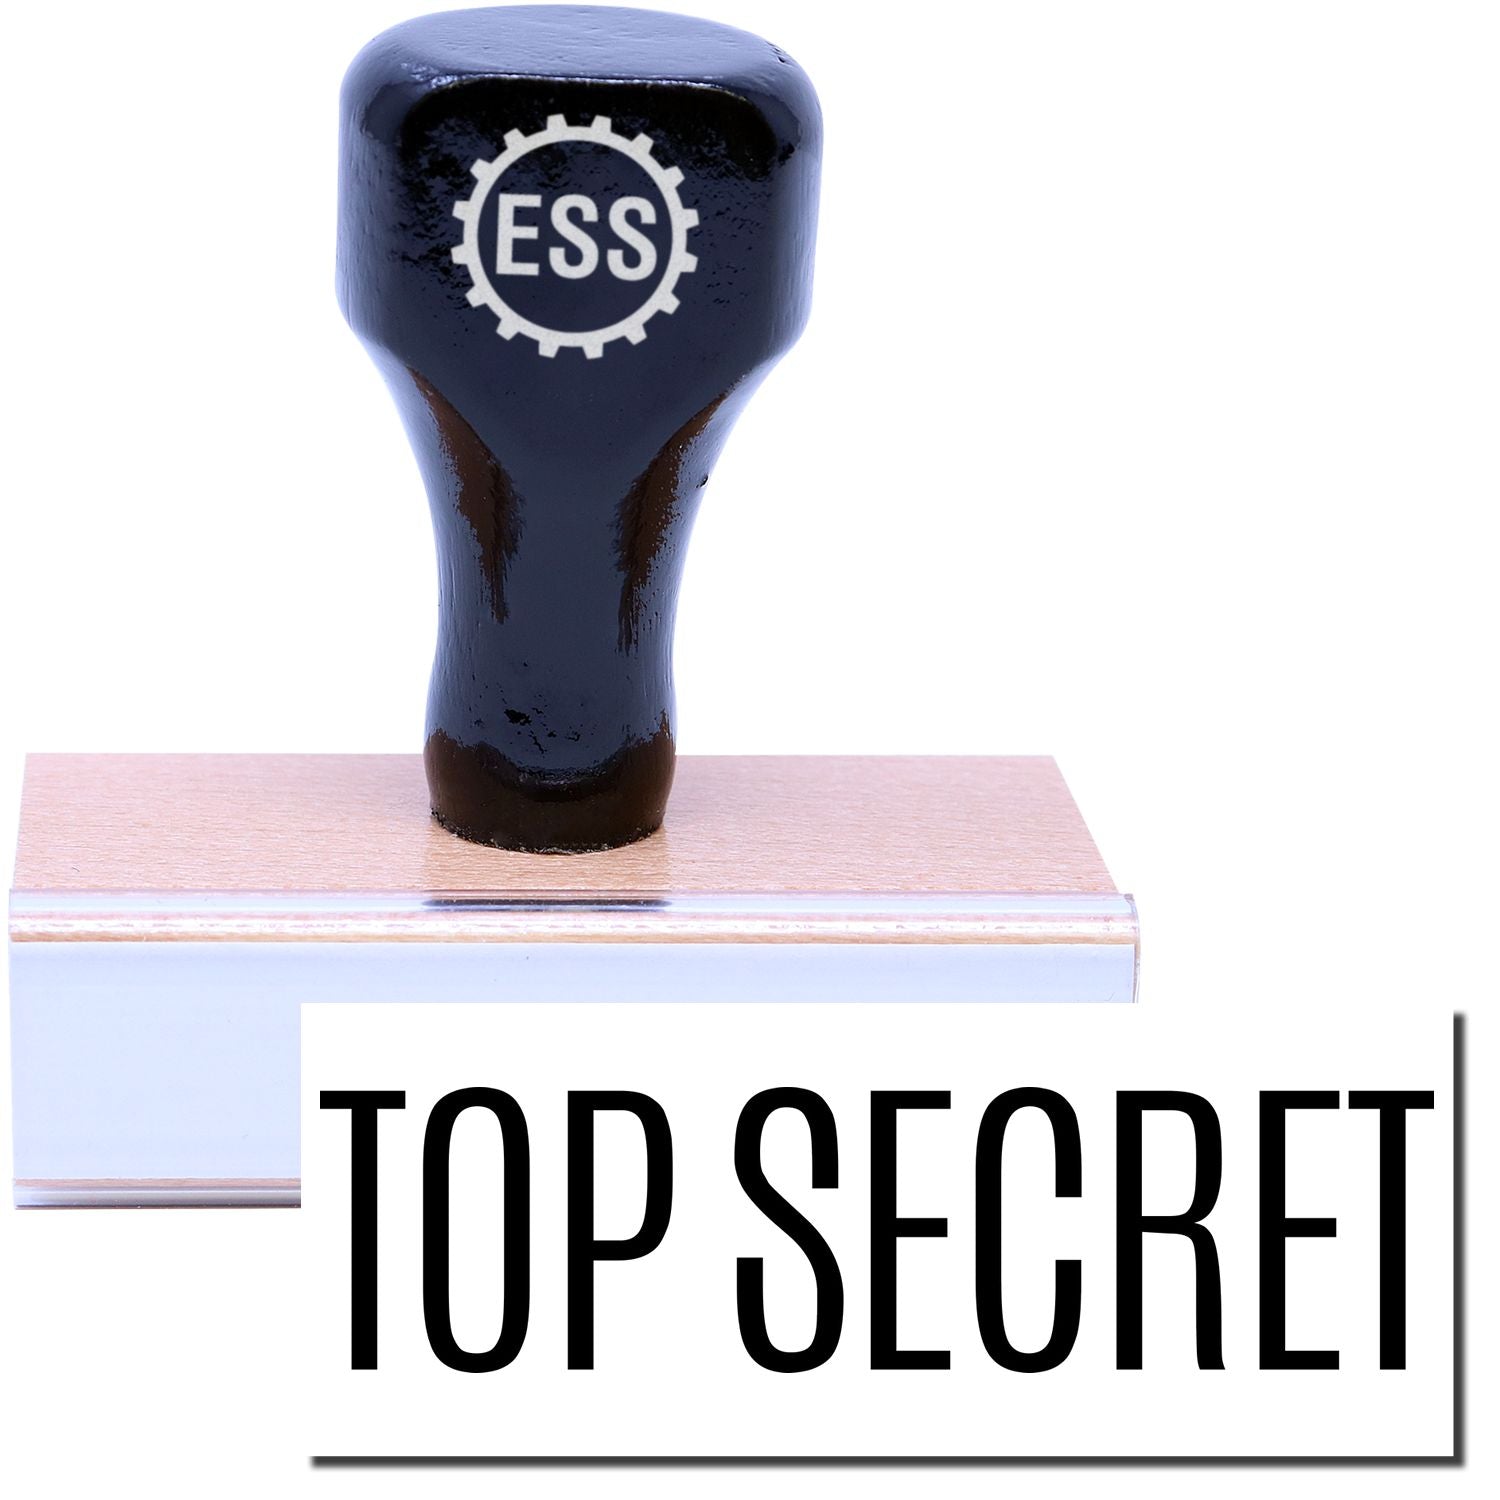 A stock office rubber stamp with a stamped image showing how the text "TOP SECRET" is displayed after stamping.